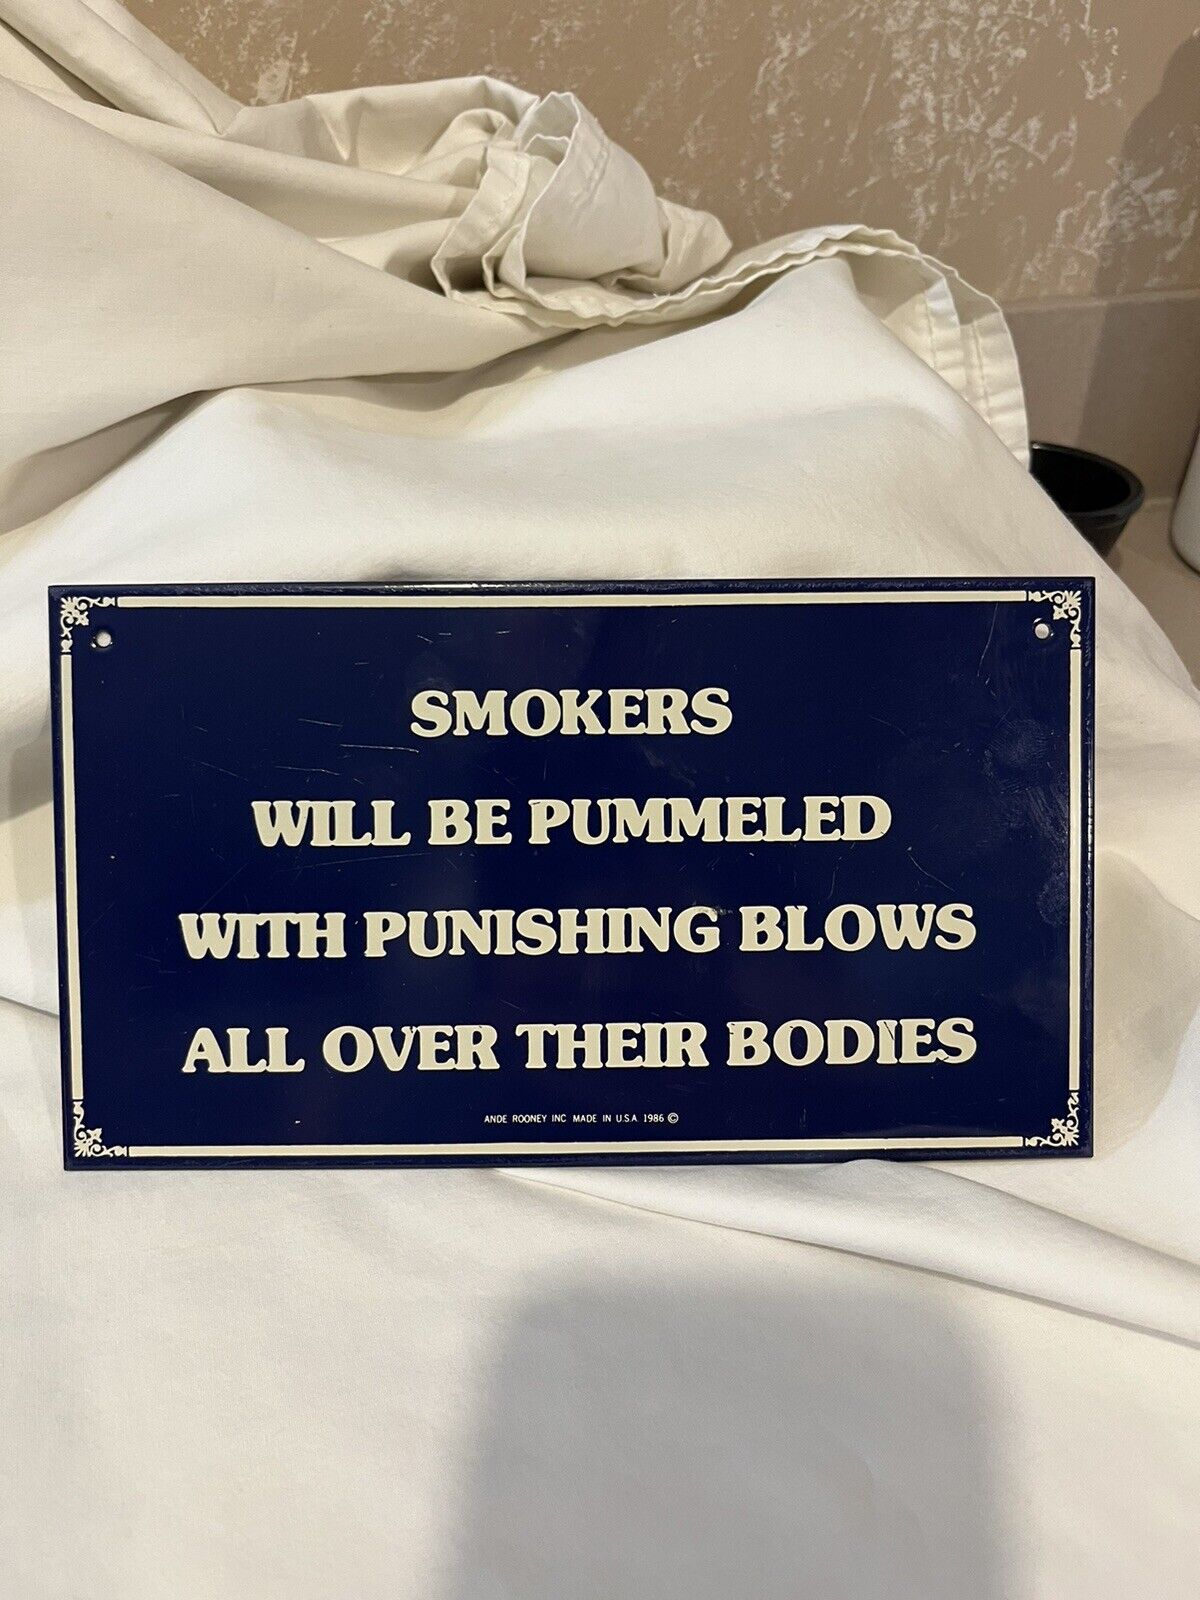 Vtg. Metal Porcelain Smokers Will Be Pummeled Sign by Ande Rooney 1986